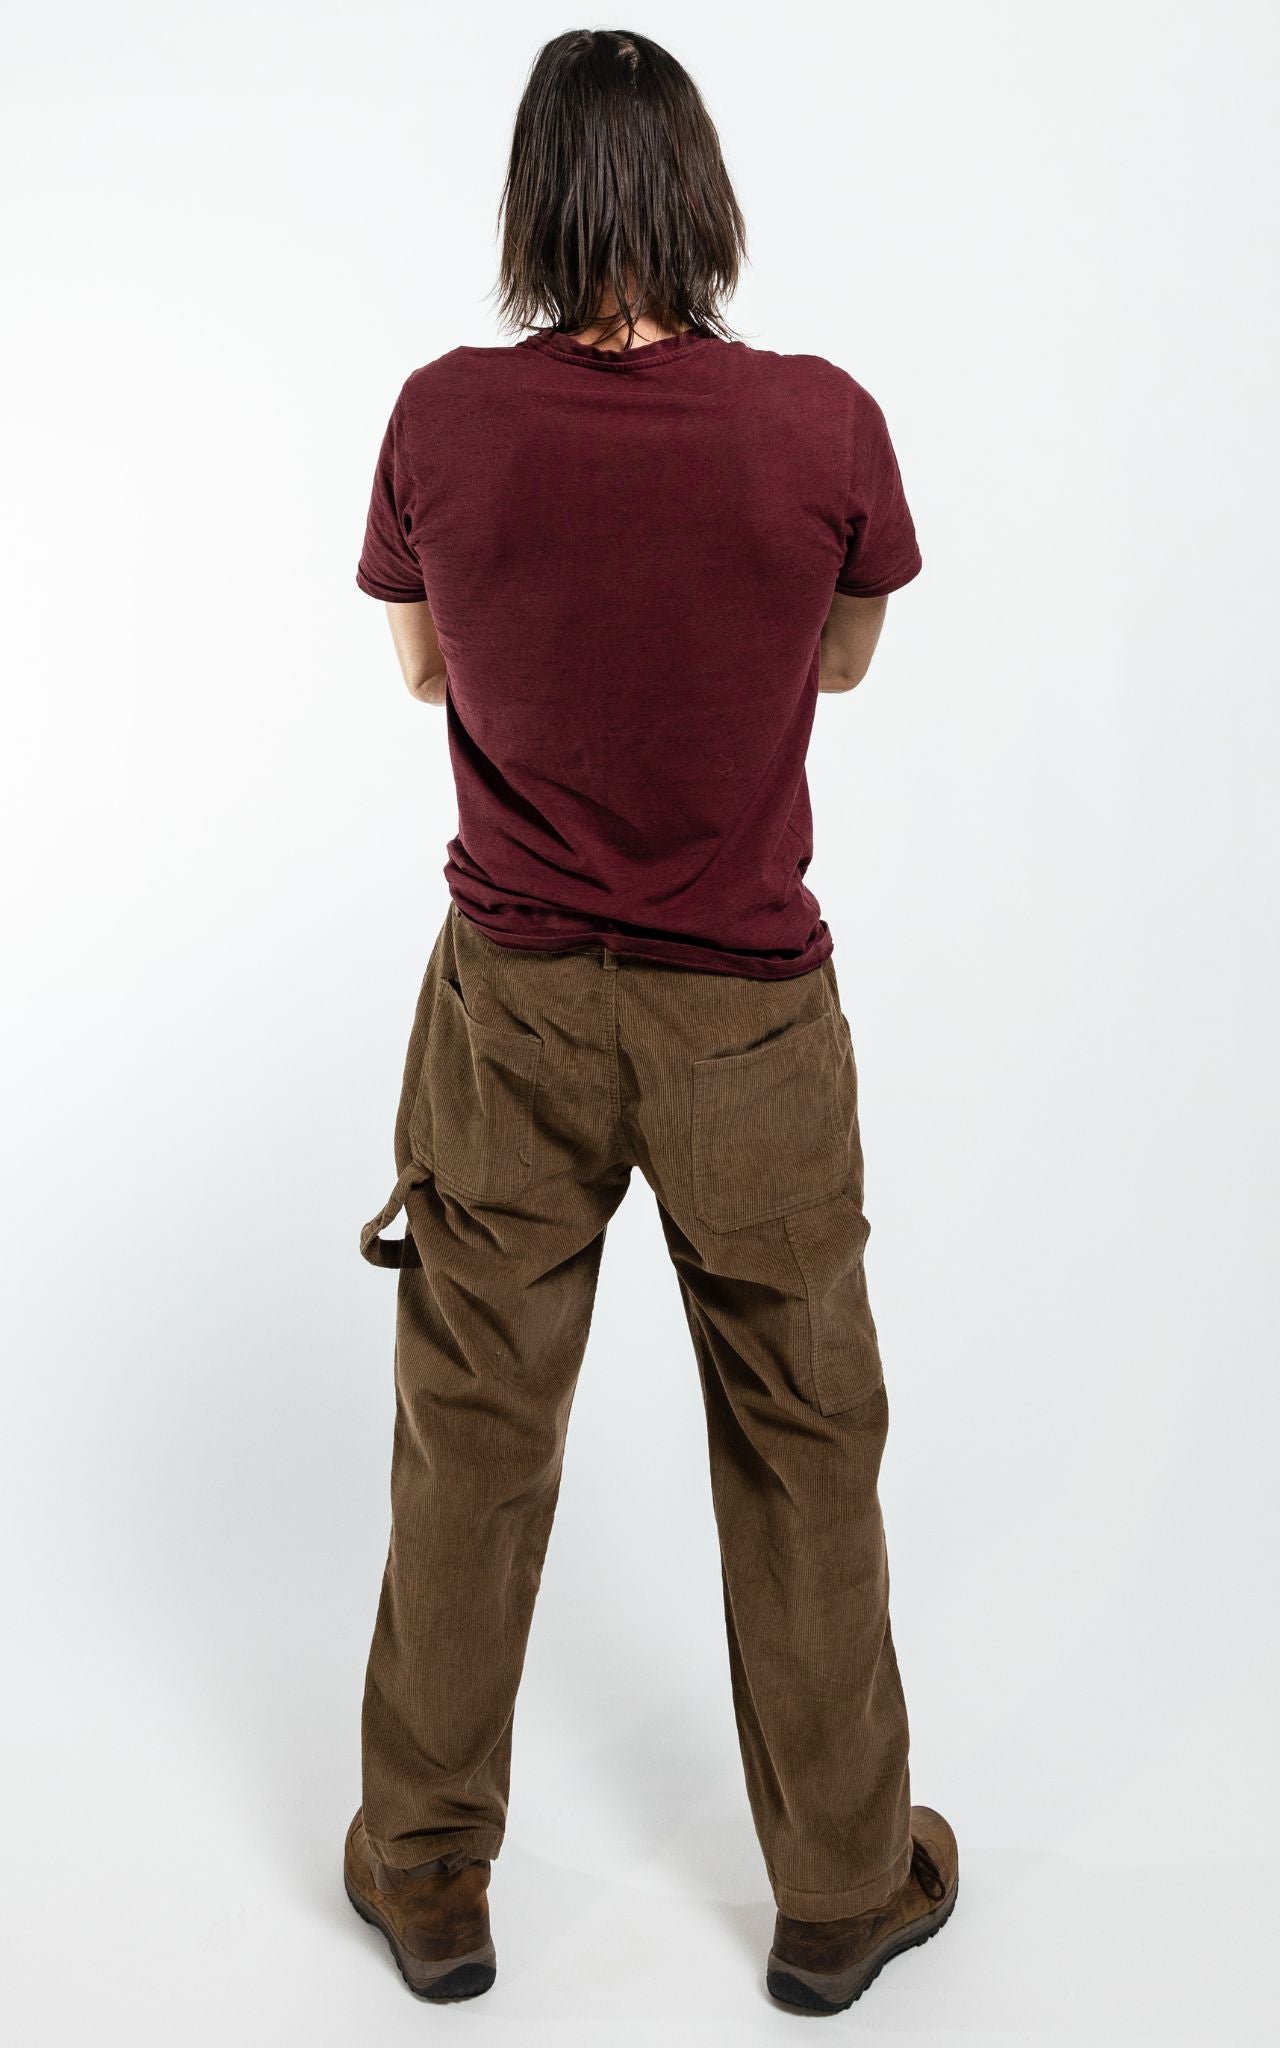 Surya Corduroy Trousers for Men made in Nepal - peanut